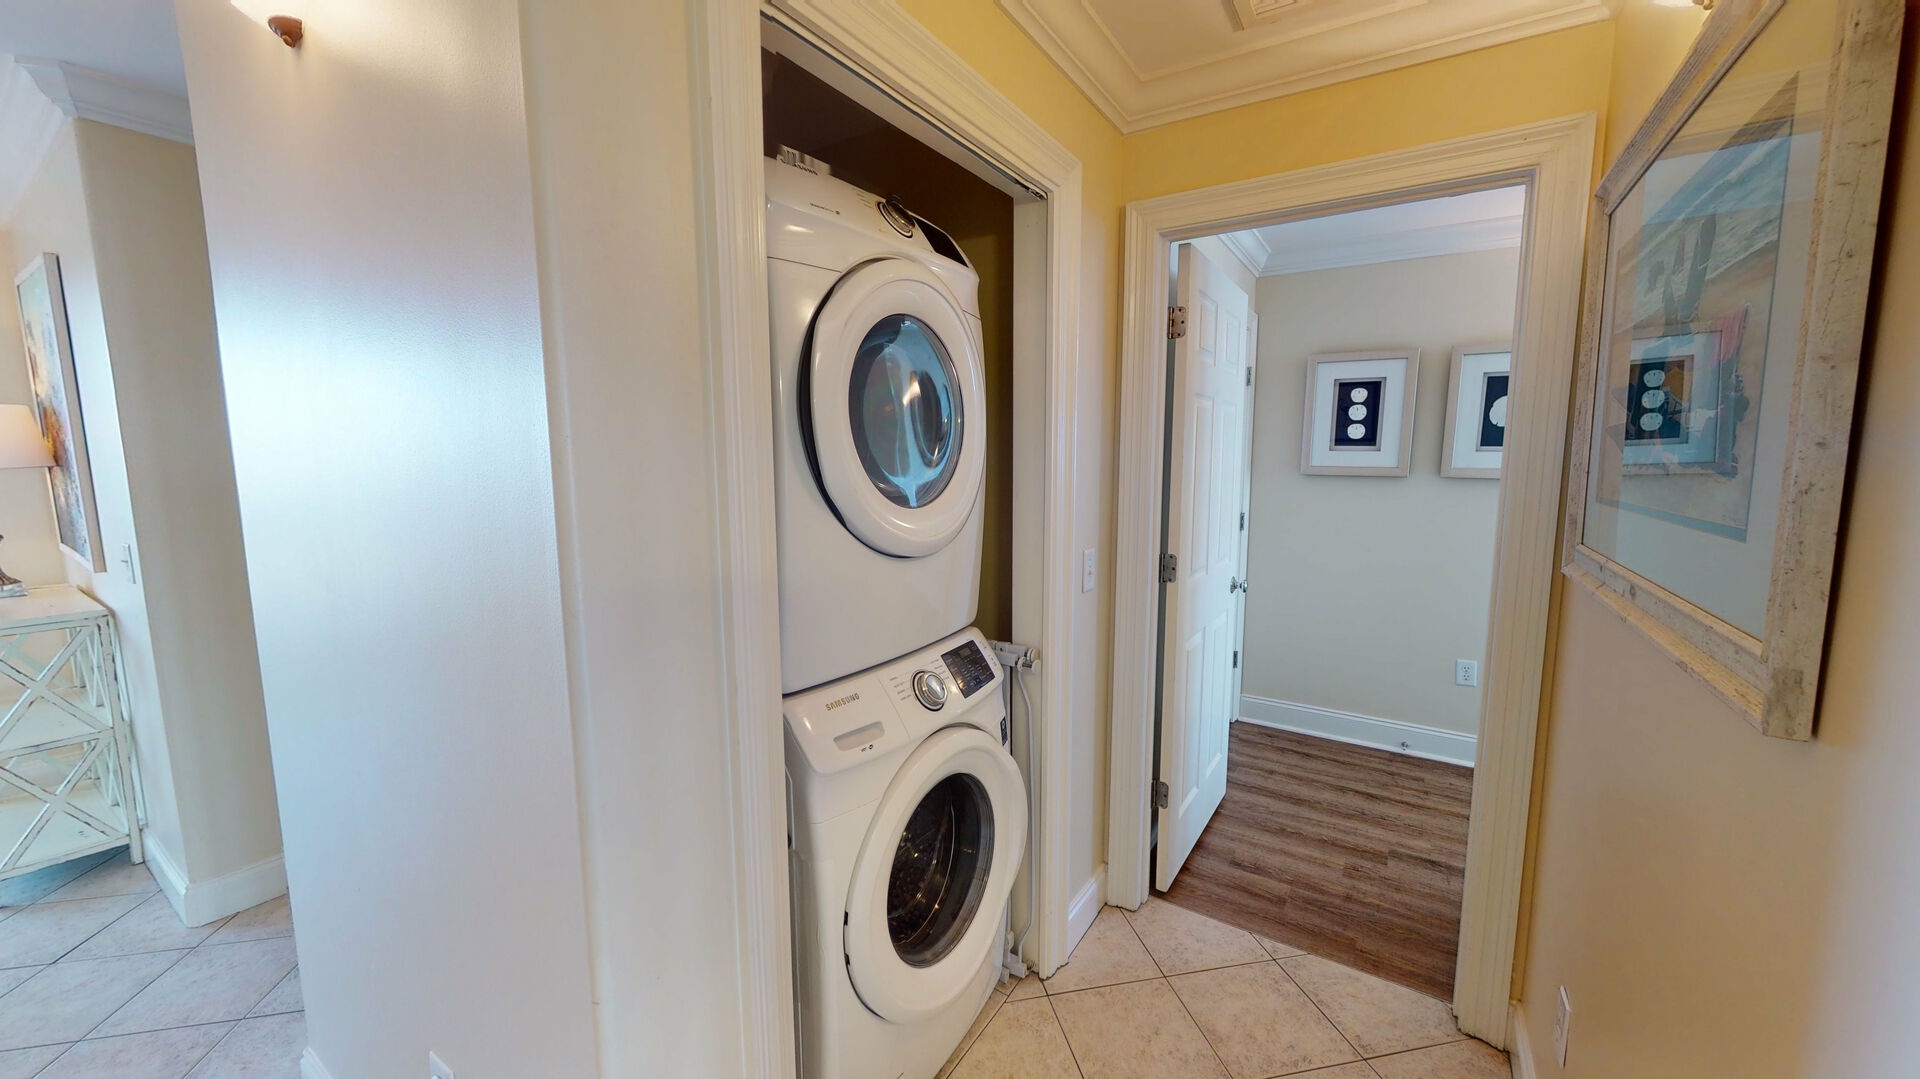 2nd floor washer and dryer